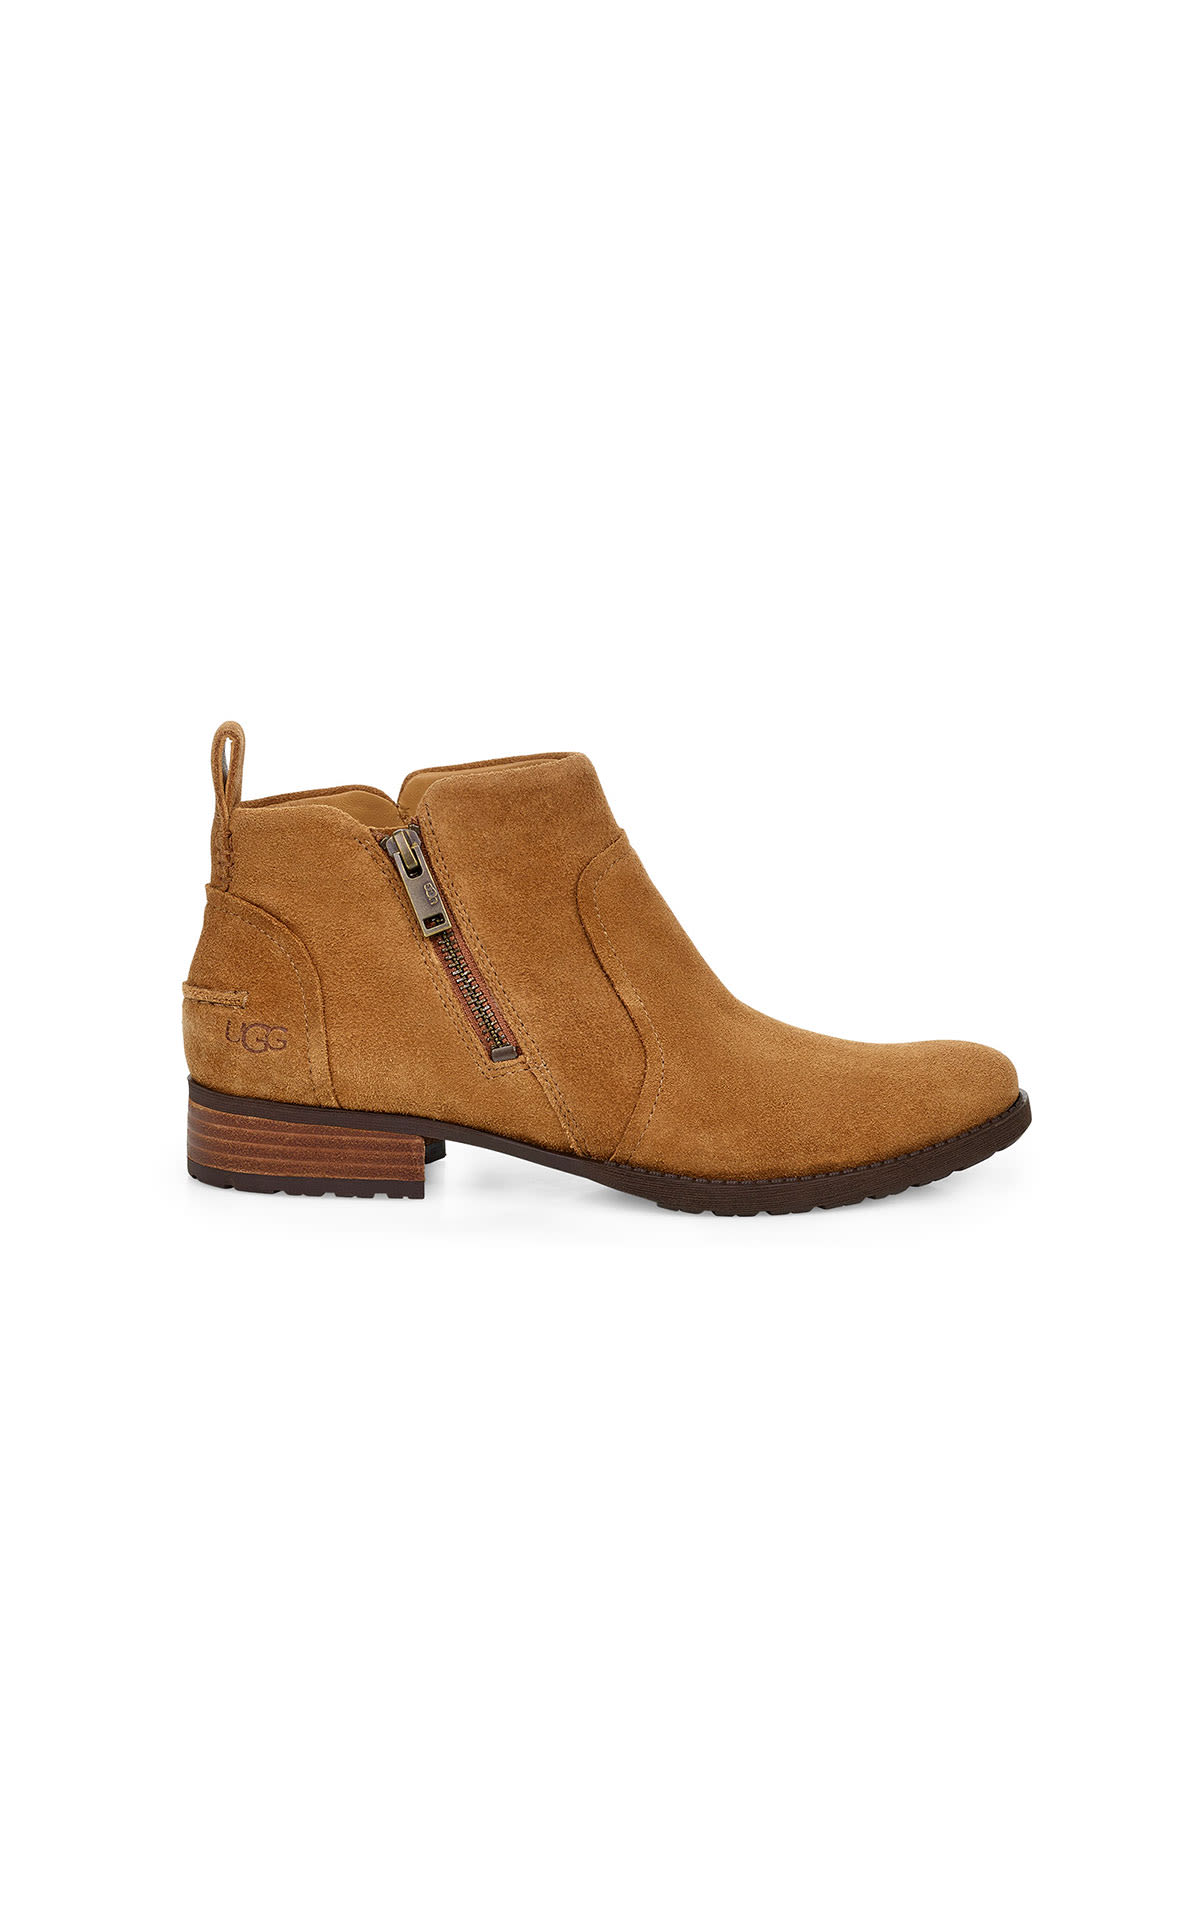 Brown ankle boots with mini heel for women UGG